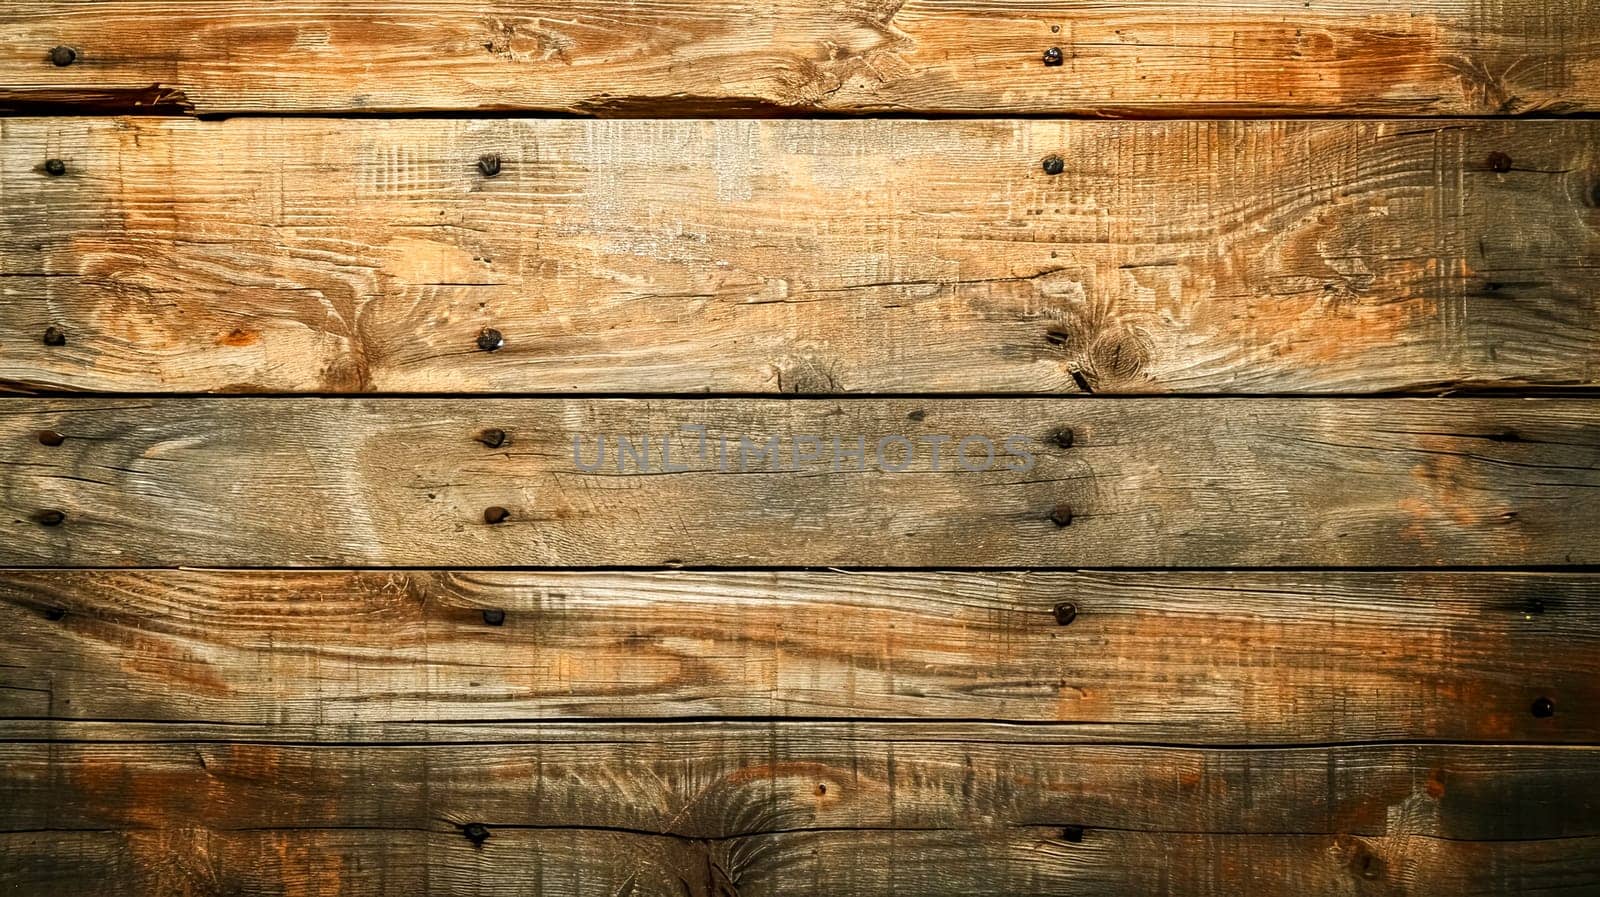 rustic wooden plank wall, with variations in color from warm amber to deep browns, highlighted by the natural grain and knots of the wood by Edophoto